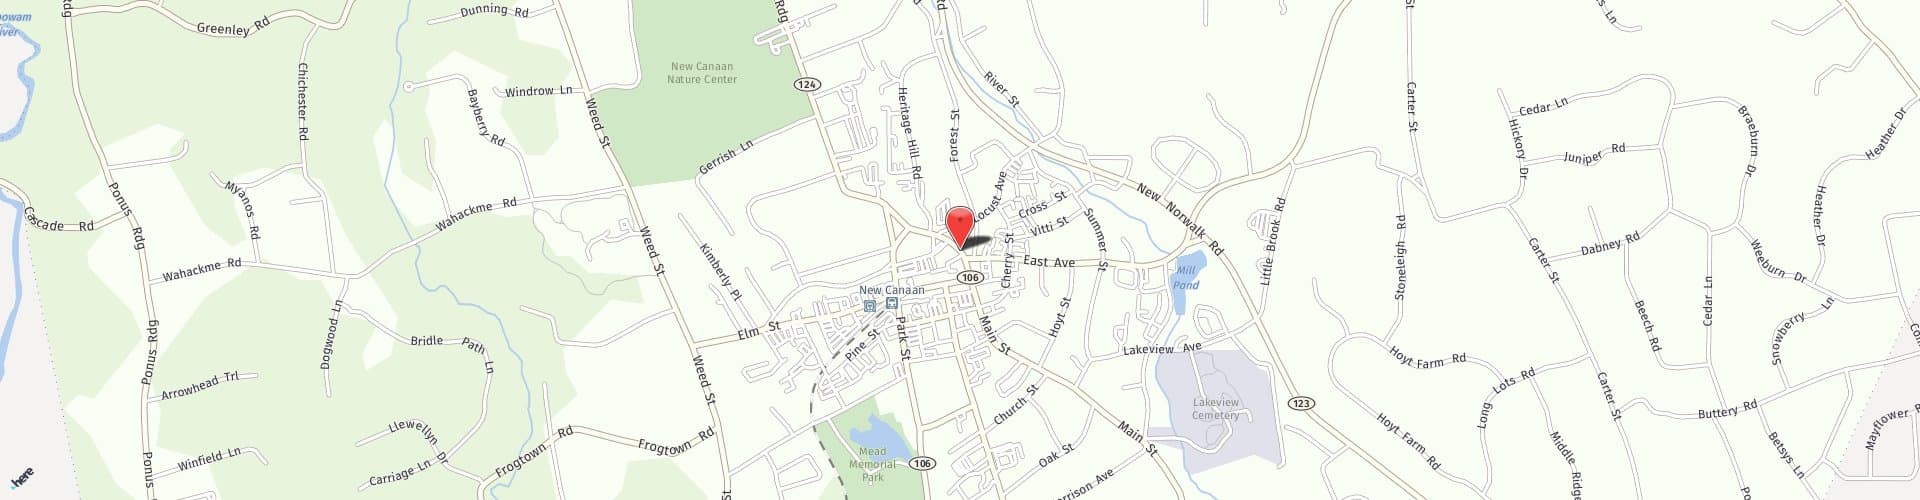 Location Map: 80 Main St. New Canaan, CT 06840